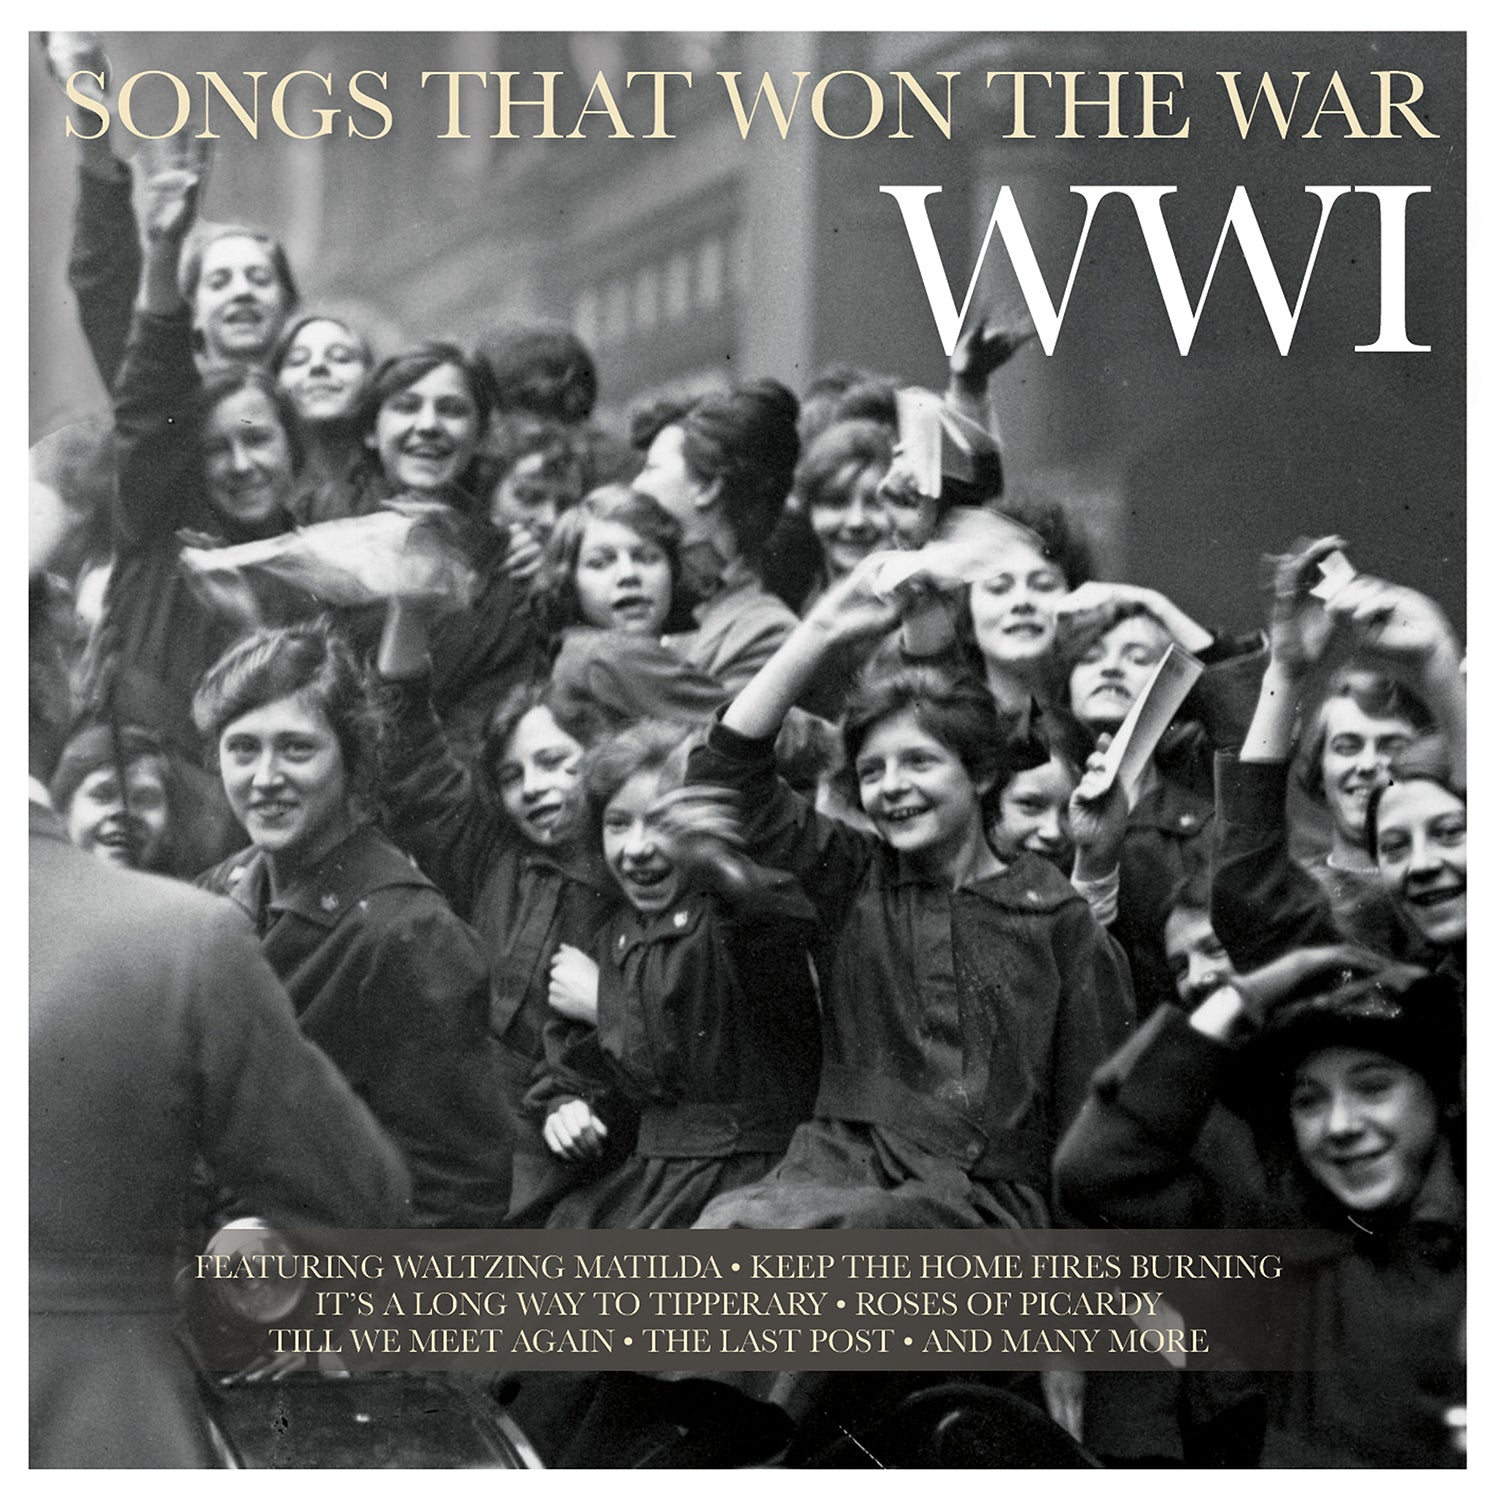 VARIOUS ARTISTS - SONGS THAT WON THE WAR: WWI